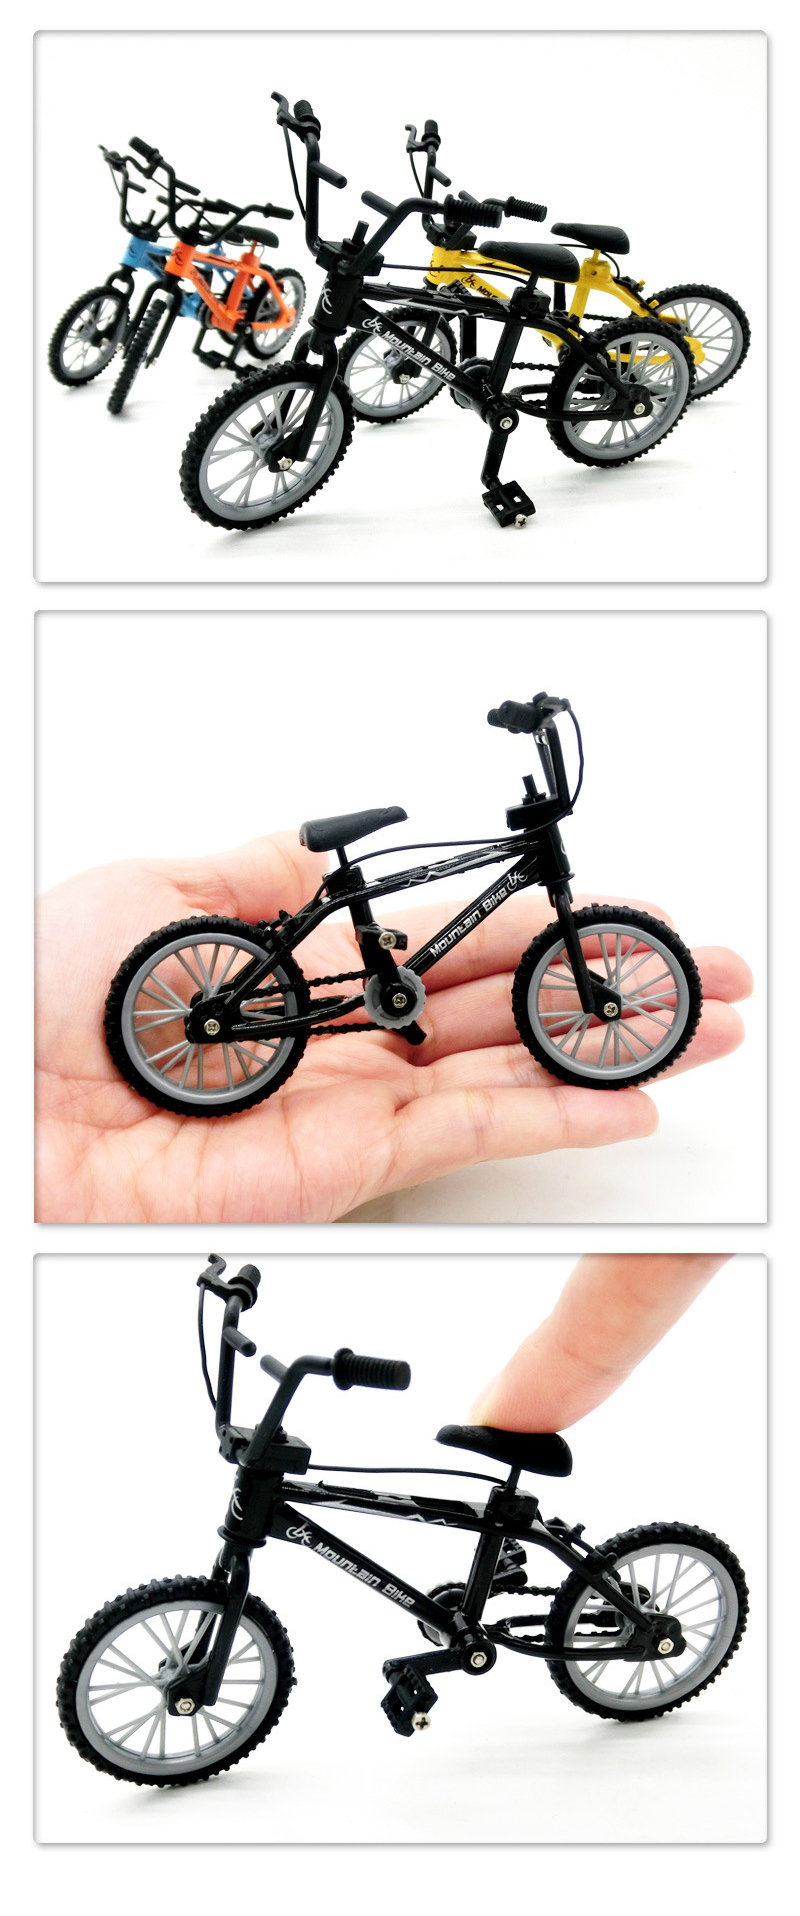 Mini-Simulation-Alloy-Finger-Bicycle-Retro-Double-Pole-Bicycle-Model-w-Spare-Tire-Diecast-Toys-With--1534698-5